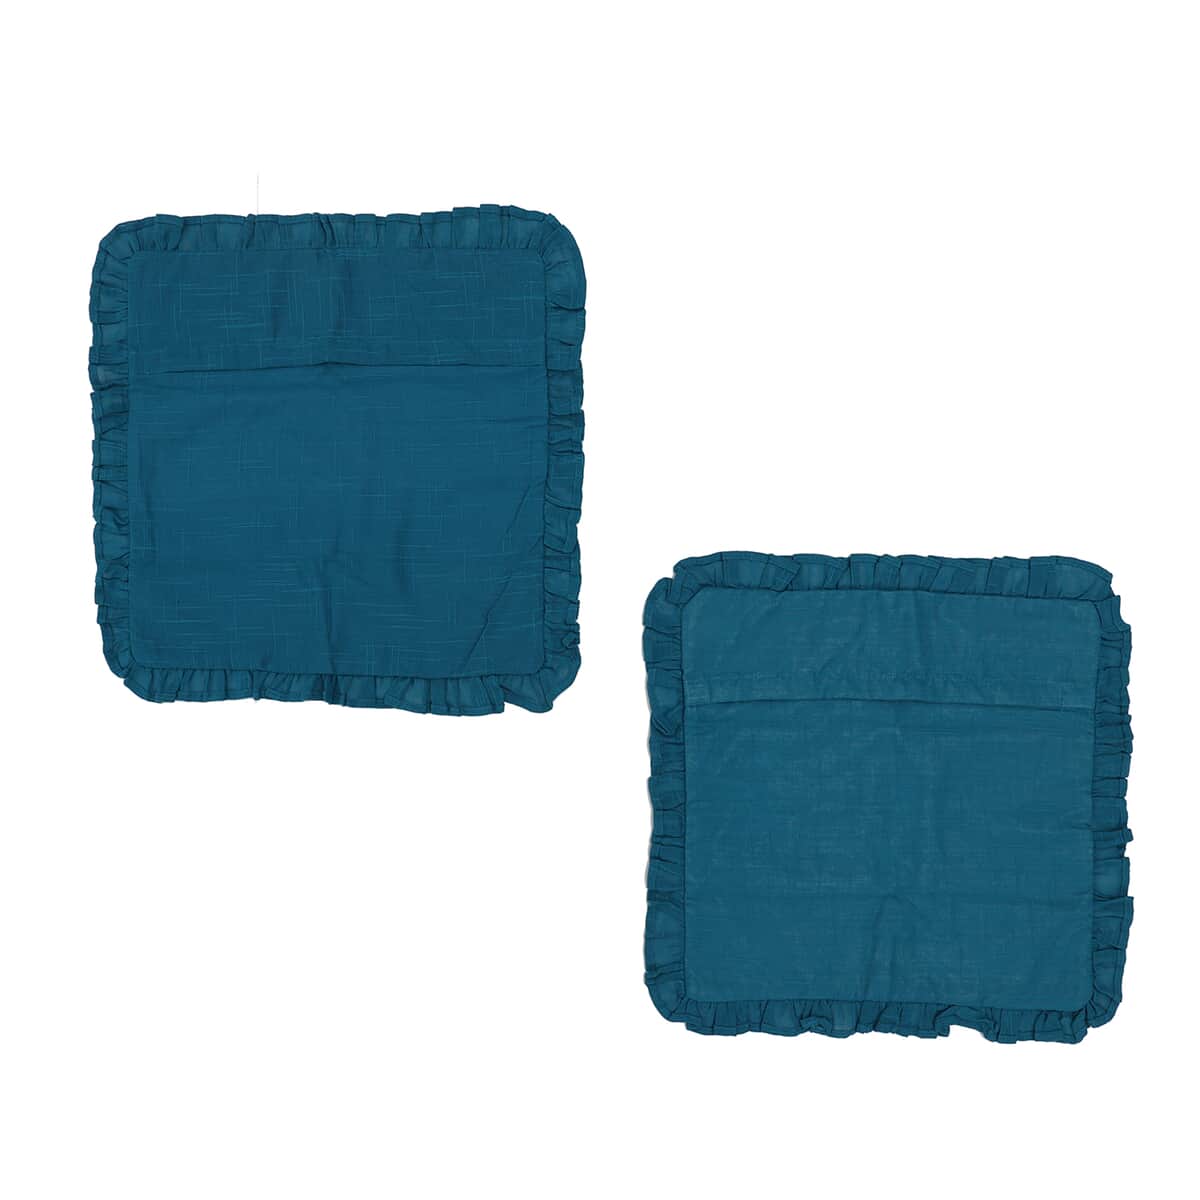 Set of 2 Cobalt Blue Cotton Linen Solid Cushion Cover with Ruffled Flange (20"x20") image number 3